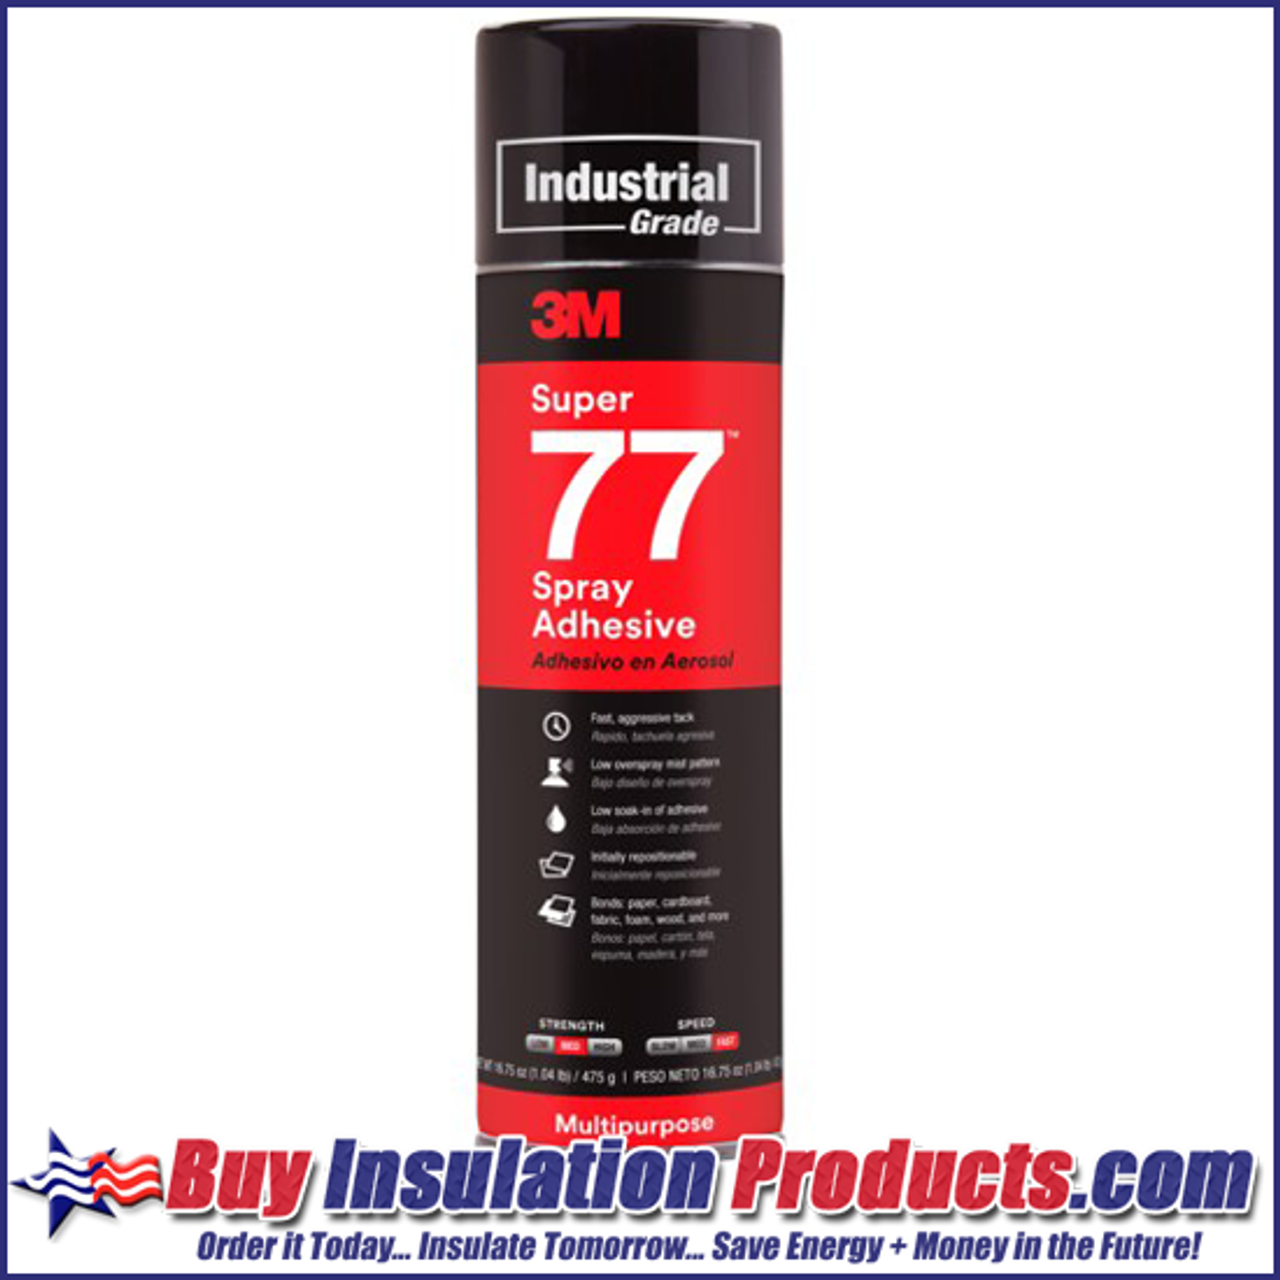 3M Spray Adhesive Selection Guide